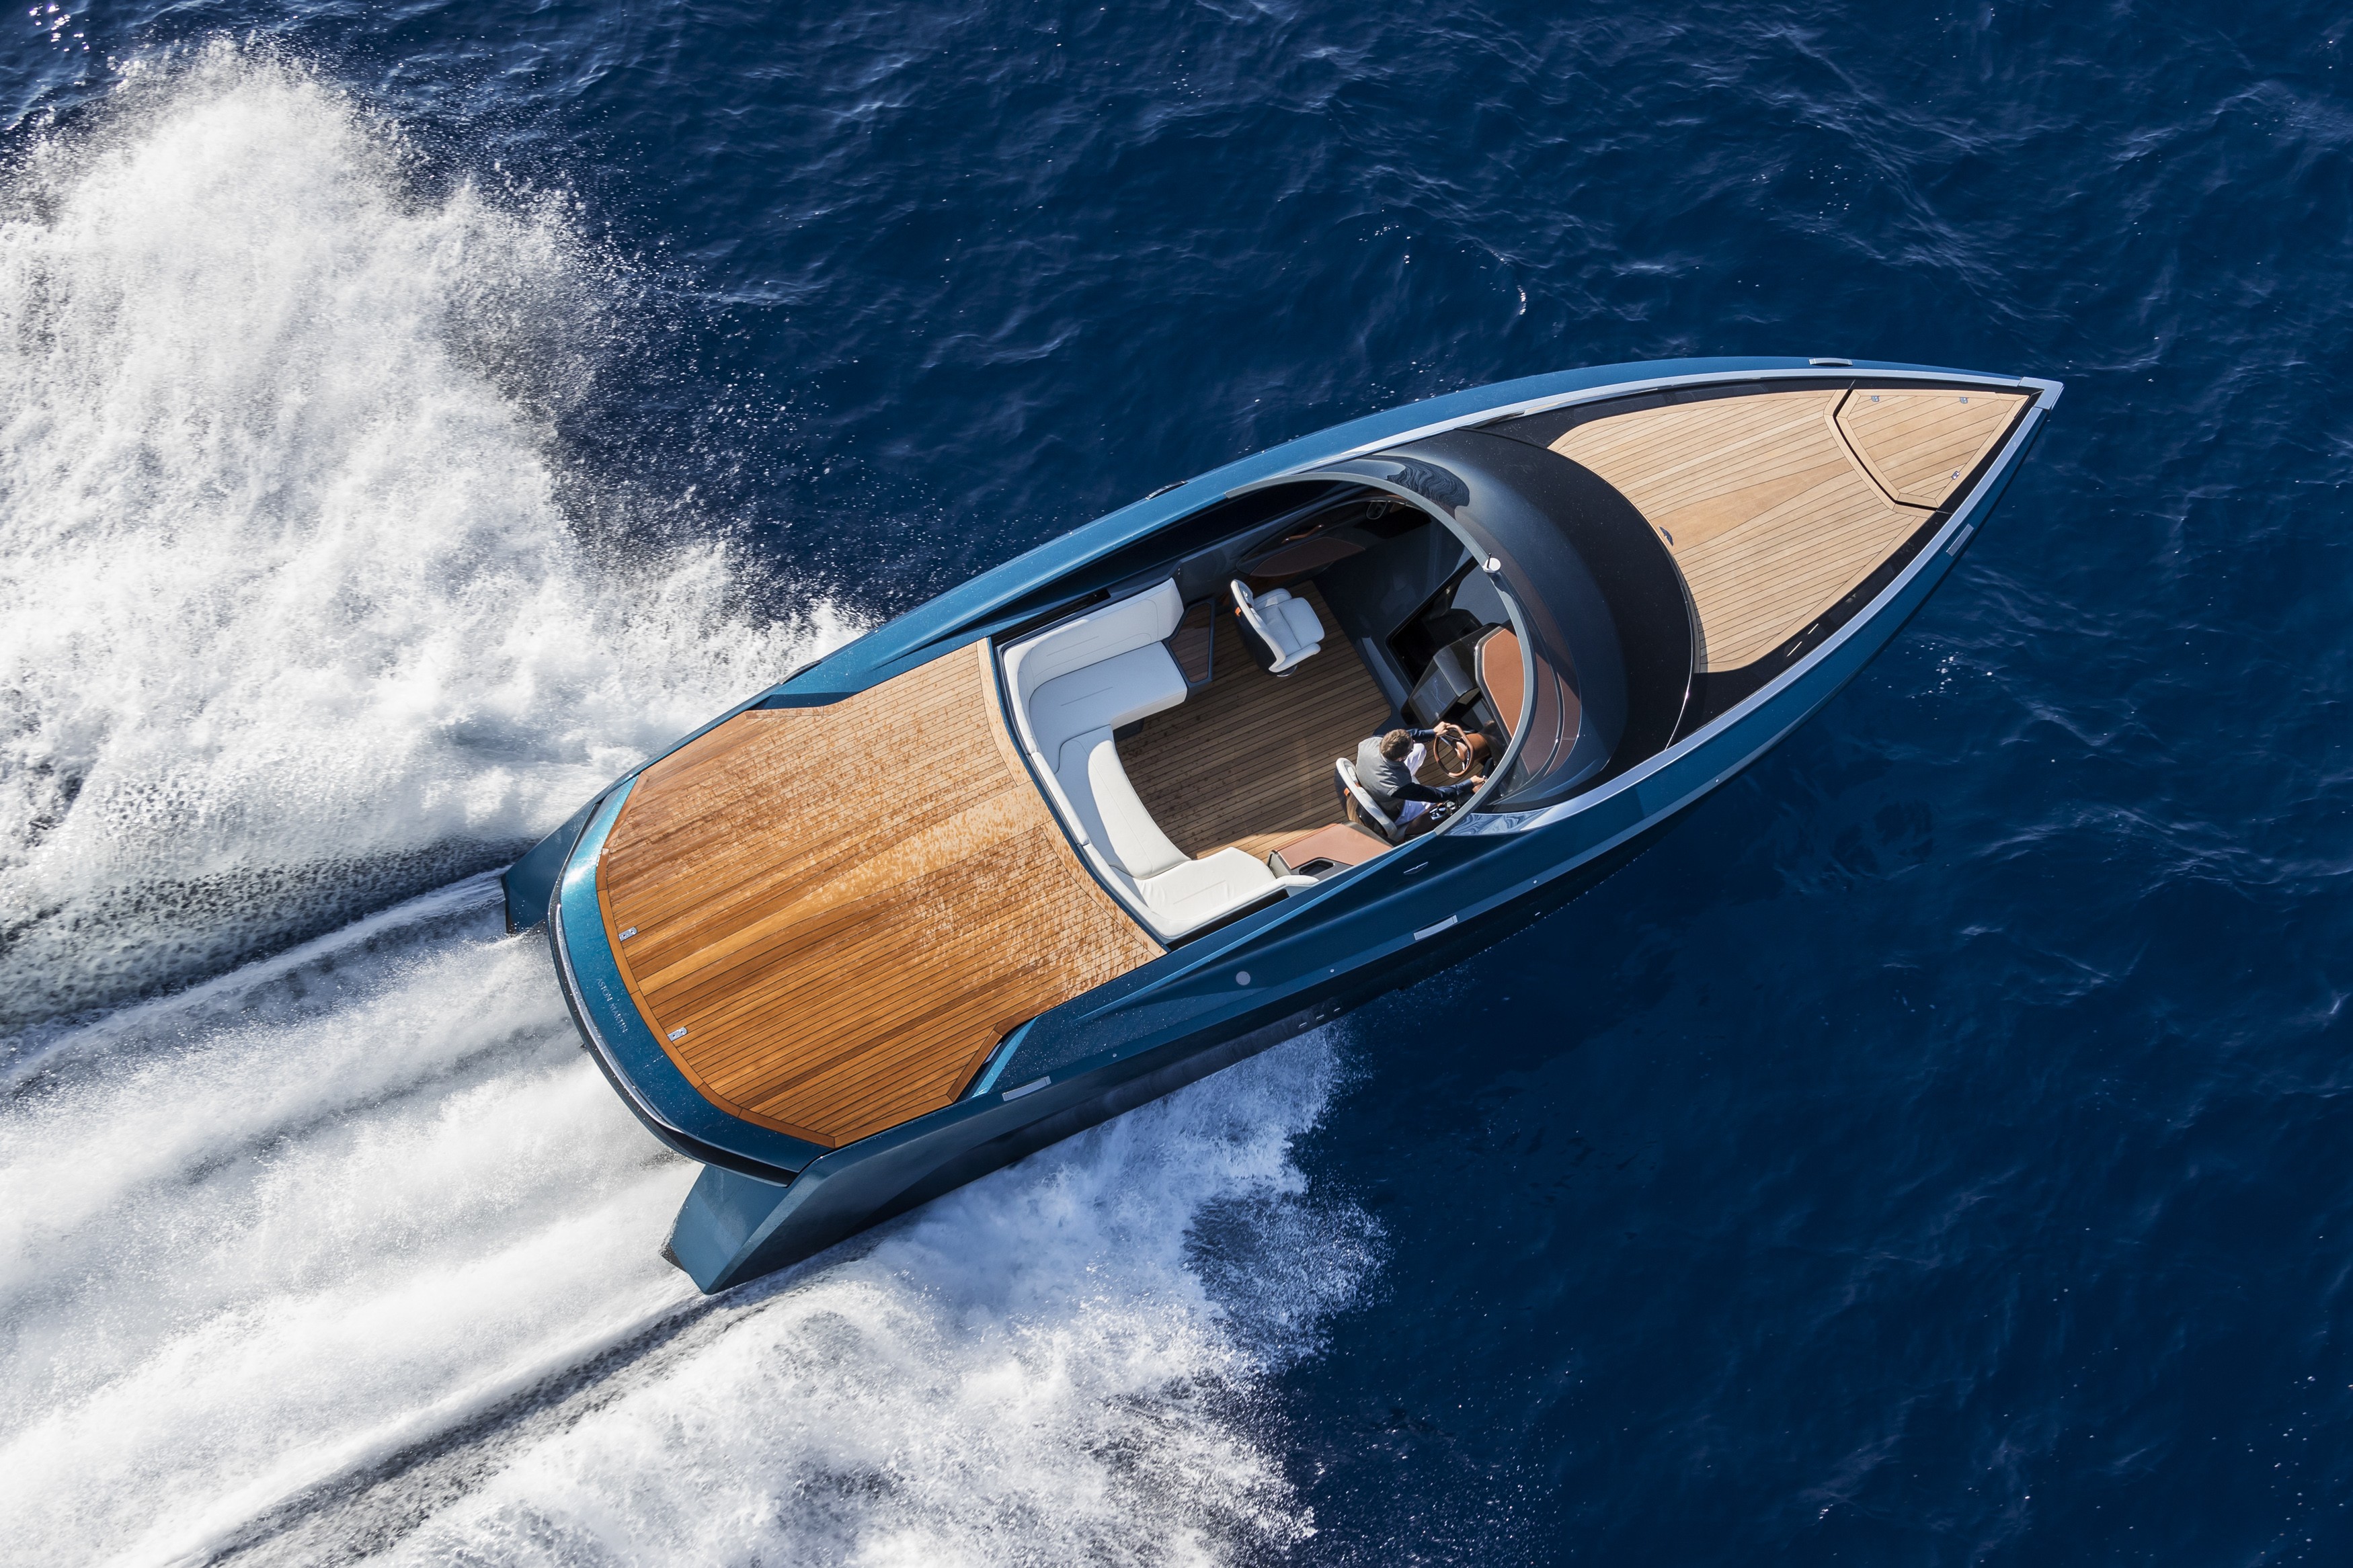 The result of a partnership between Quintessence Yachts and Aston Martin,ok the AM37 is a Bond-worthy powerboat, capable of reaching 50 knots. Photo: Carlo Borlenghi